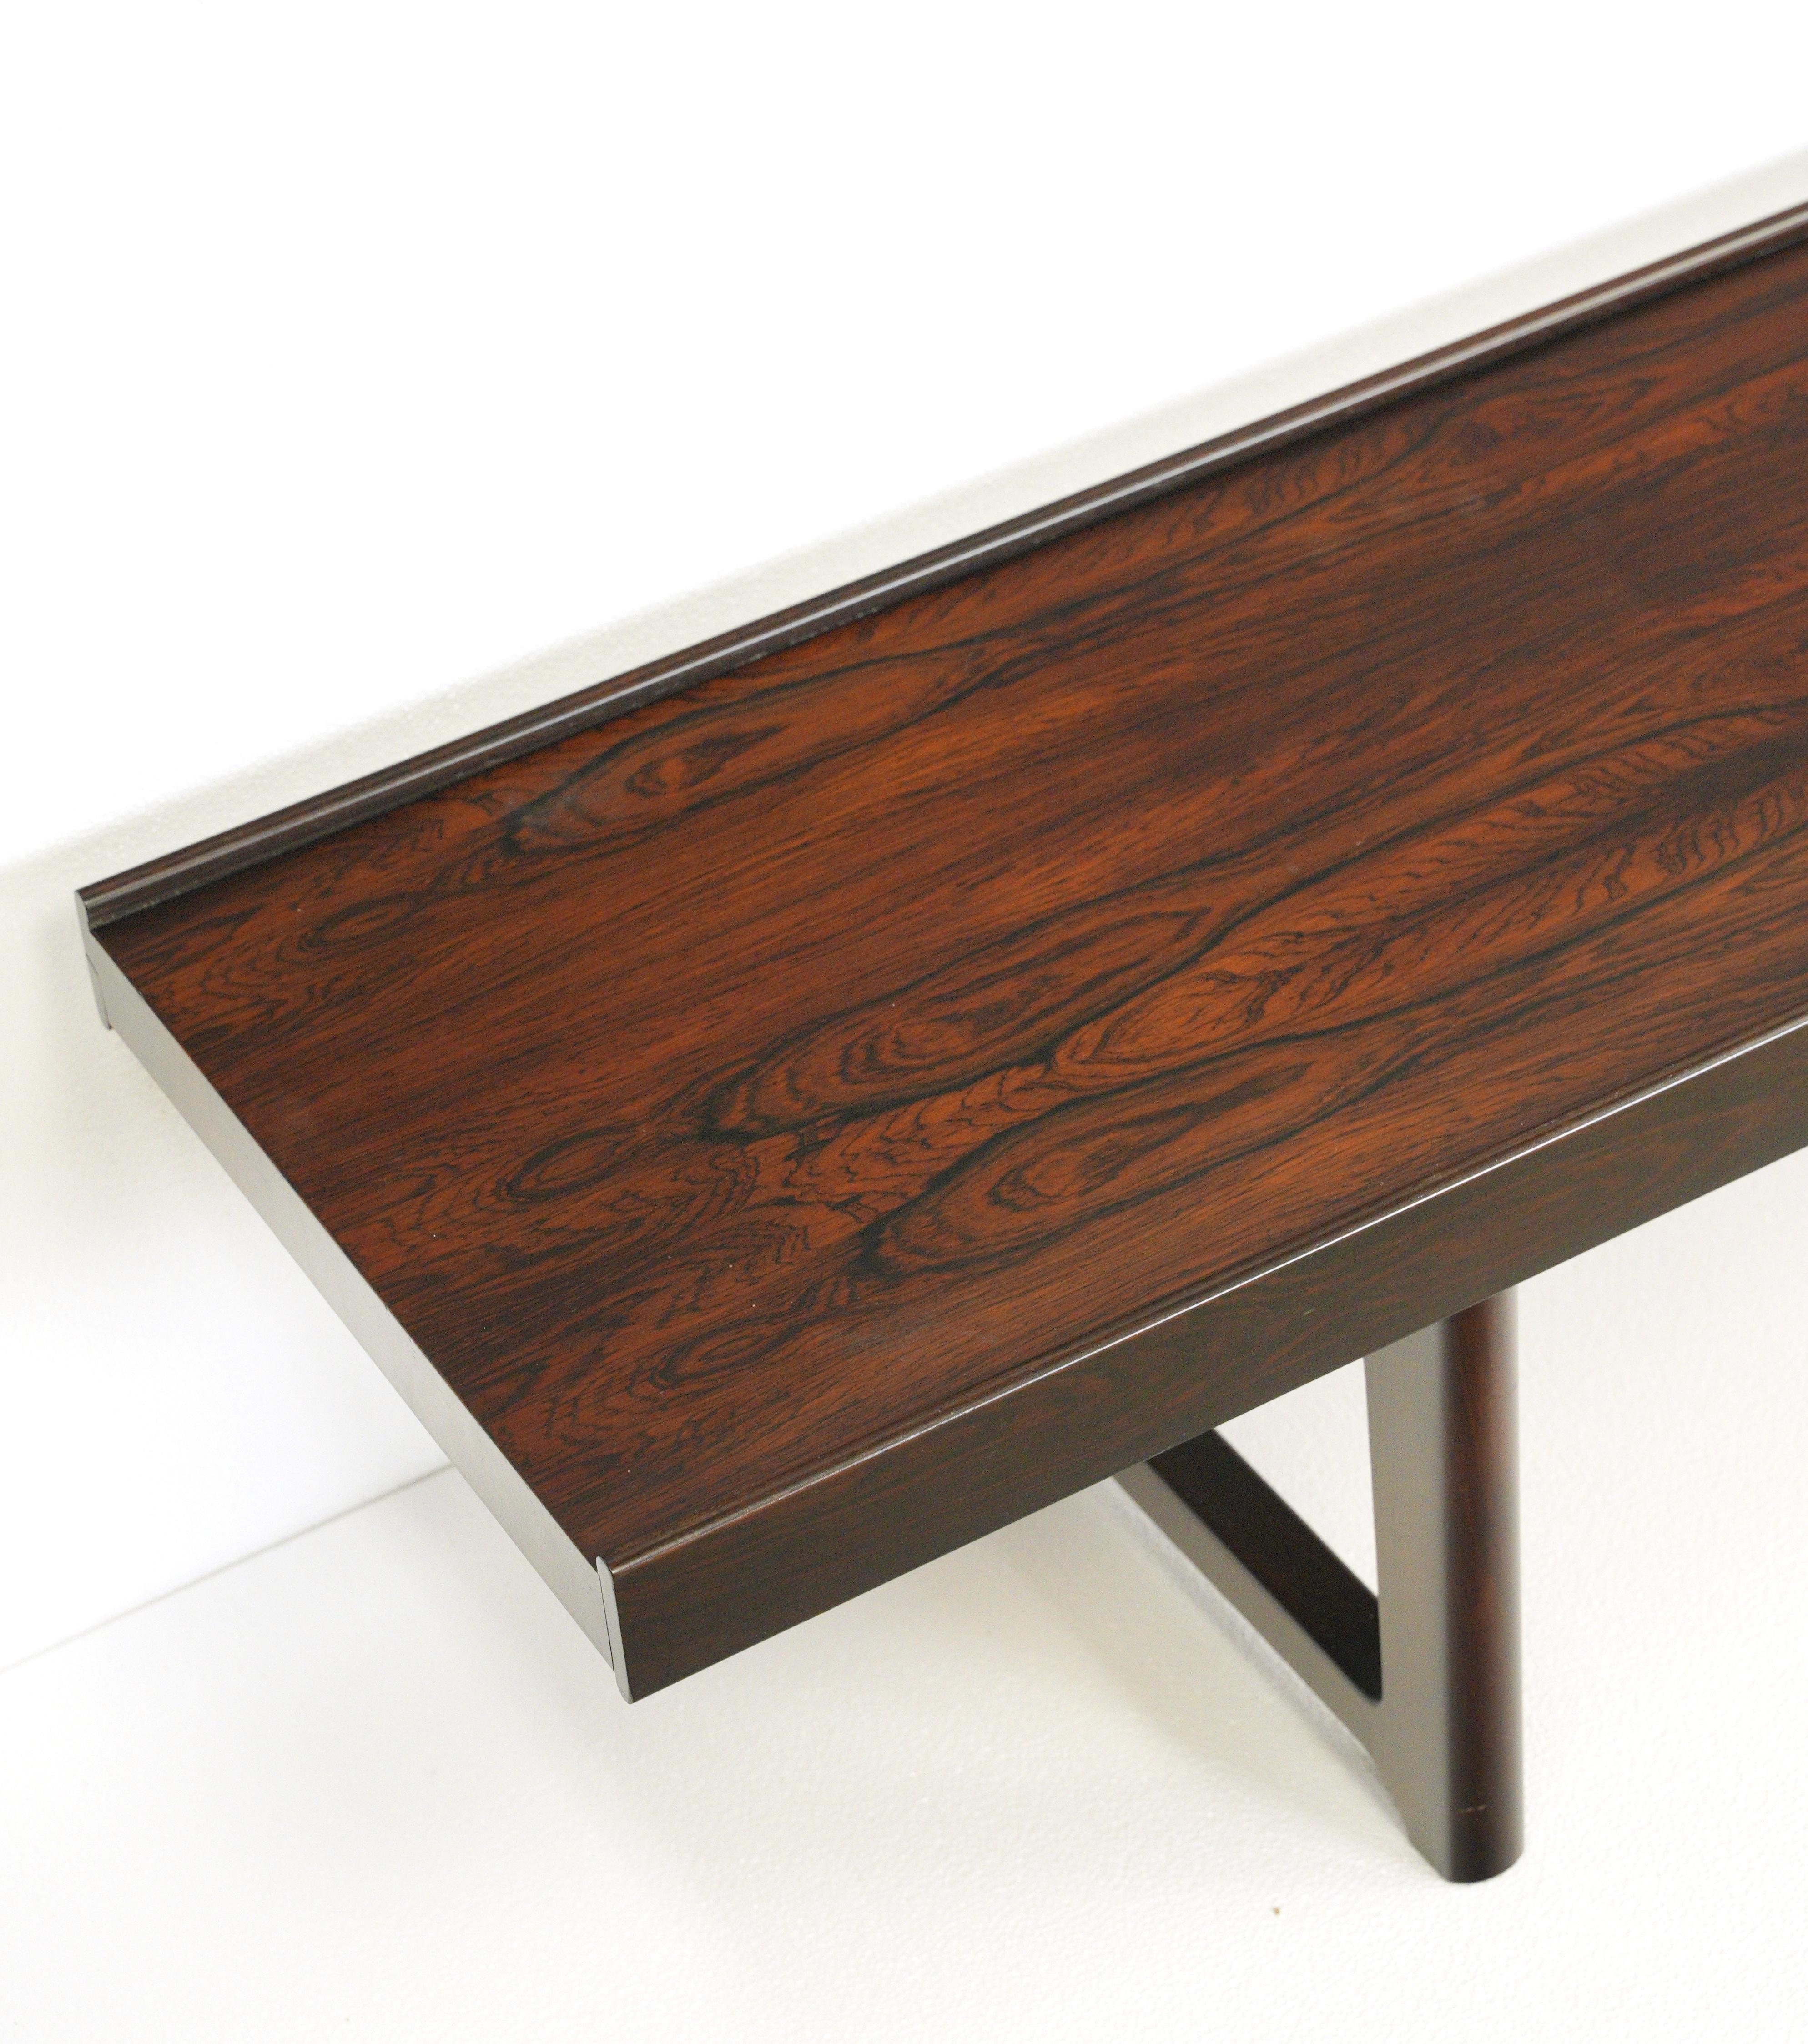 1960s Mid-Century Modern Bruksbo Rosewood Bench by Torbjon Afdal In Good Condition For Sale In New York, NY